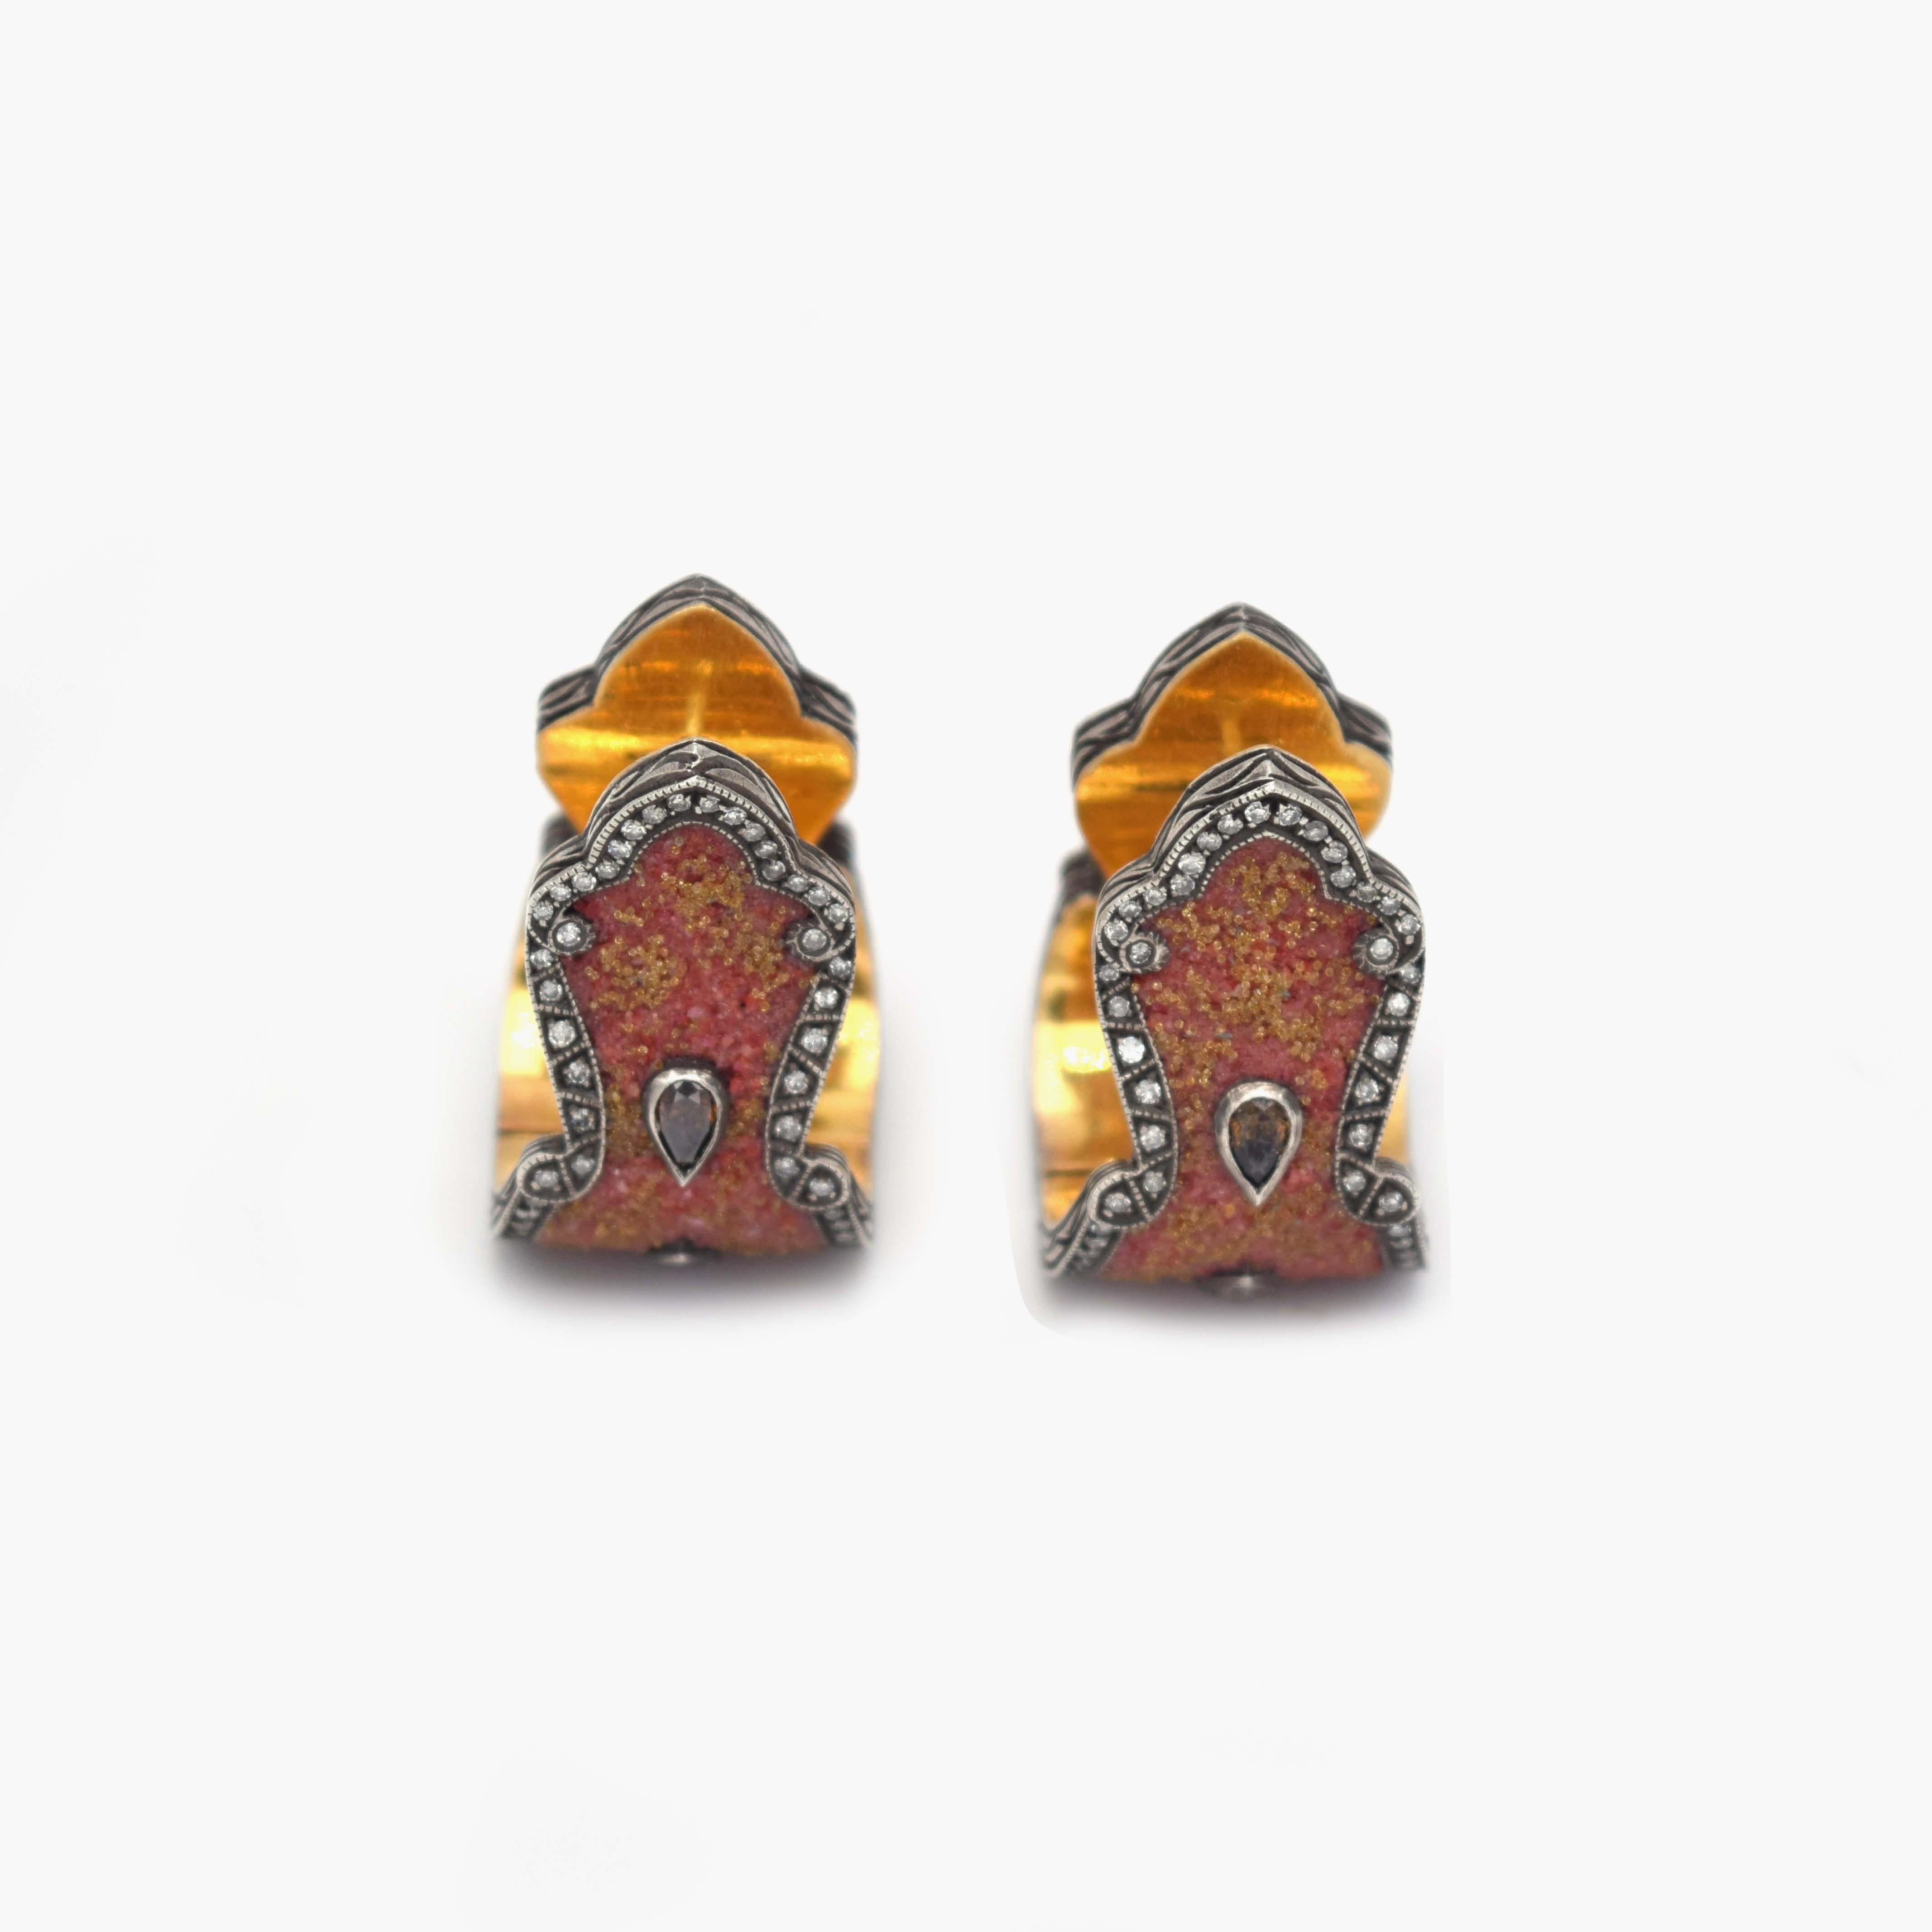 From the astounding work of Sevan Biçakçi, inspired by the rich culture rooted in his homeland of Istanbul, this collection represents the layered and beautiful history of our past.

These earrings feature a unique design of carnelian and yellow